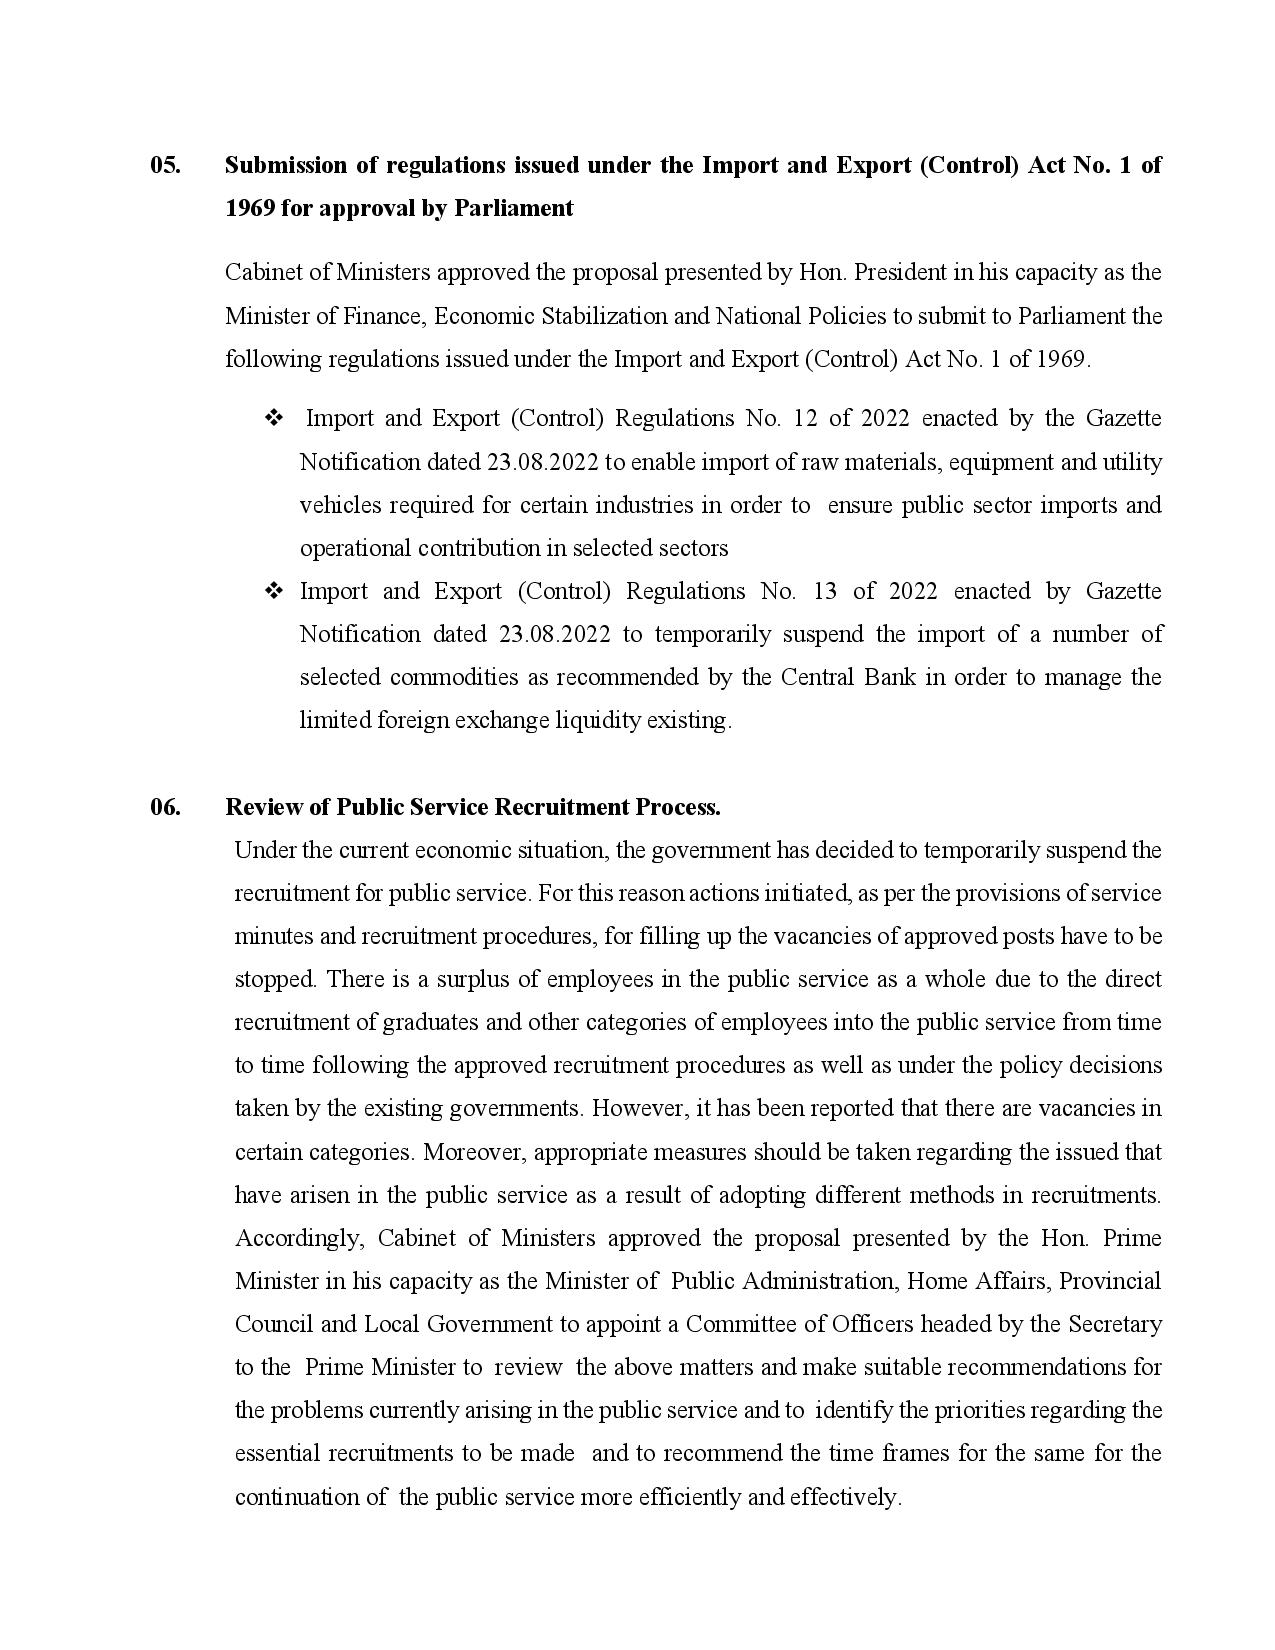 Cabinet Decision on 13.09.2022 English page 003